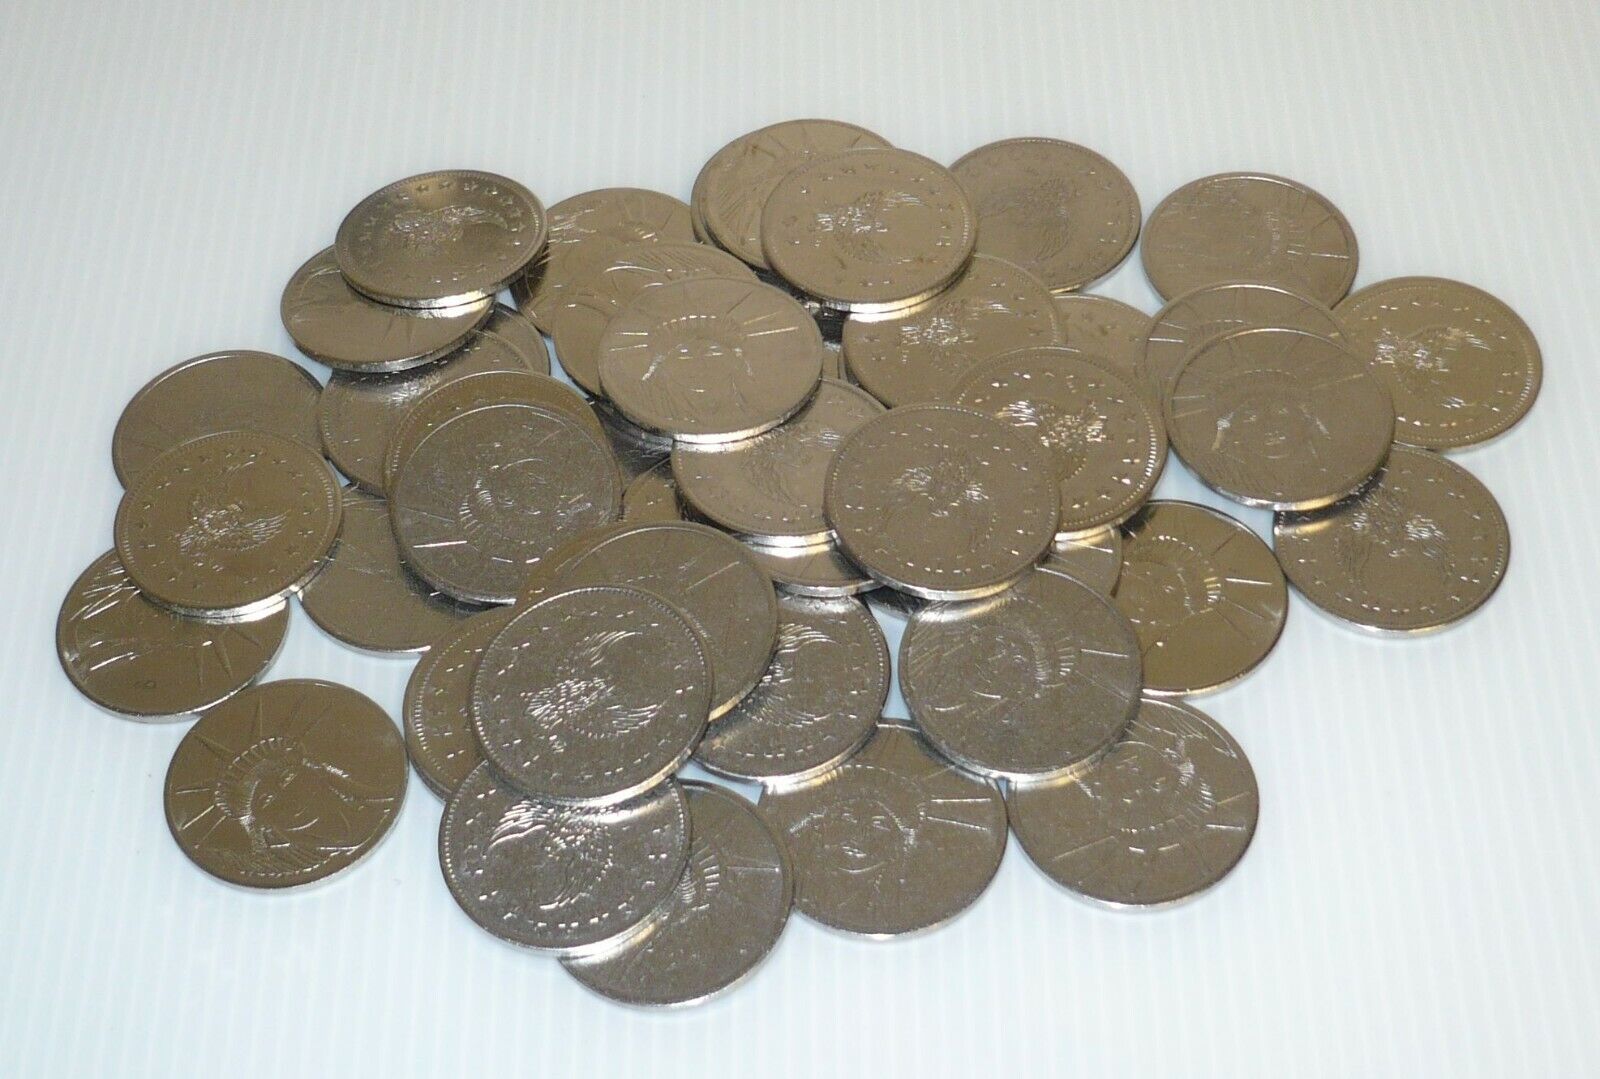 50 $1 DOLLAR SIZE STAINLESS SLOT MACHINE TOKENS - NEWLY MINTED Без бренда